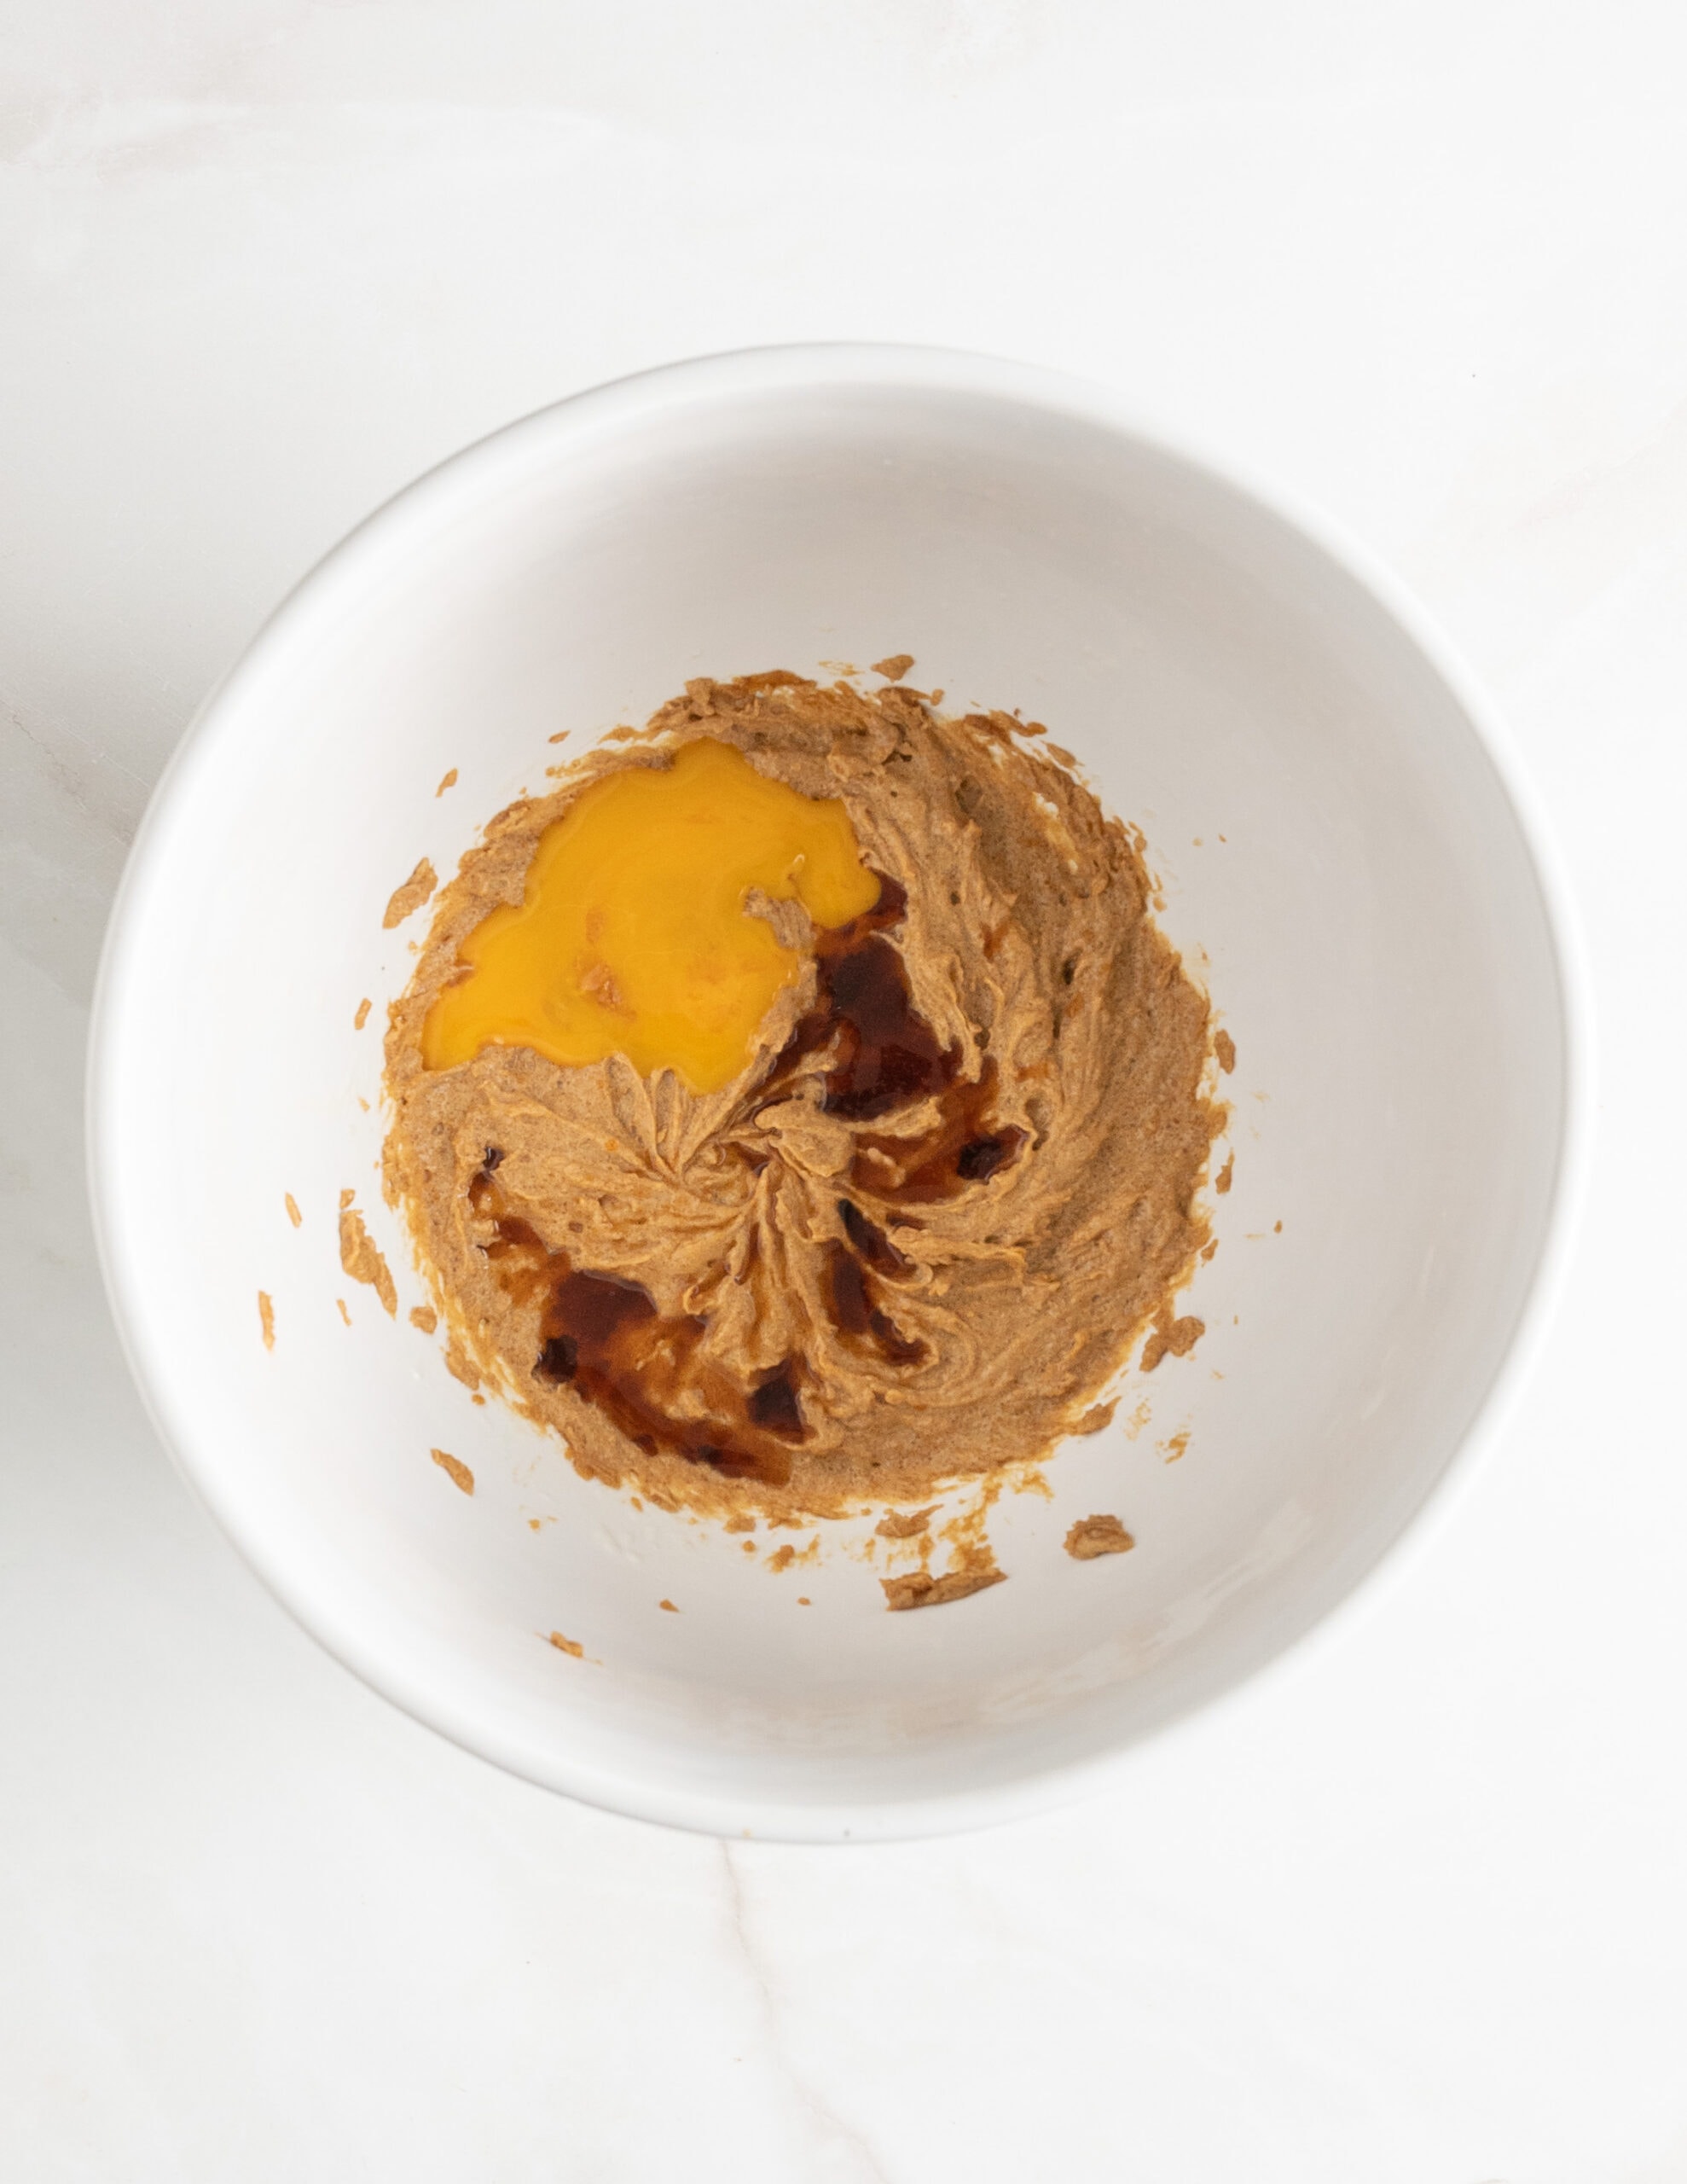 A large with bowl with an egg yolk, vanilla extract, melted butter and sugar.